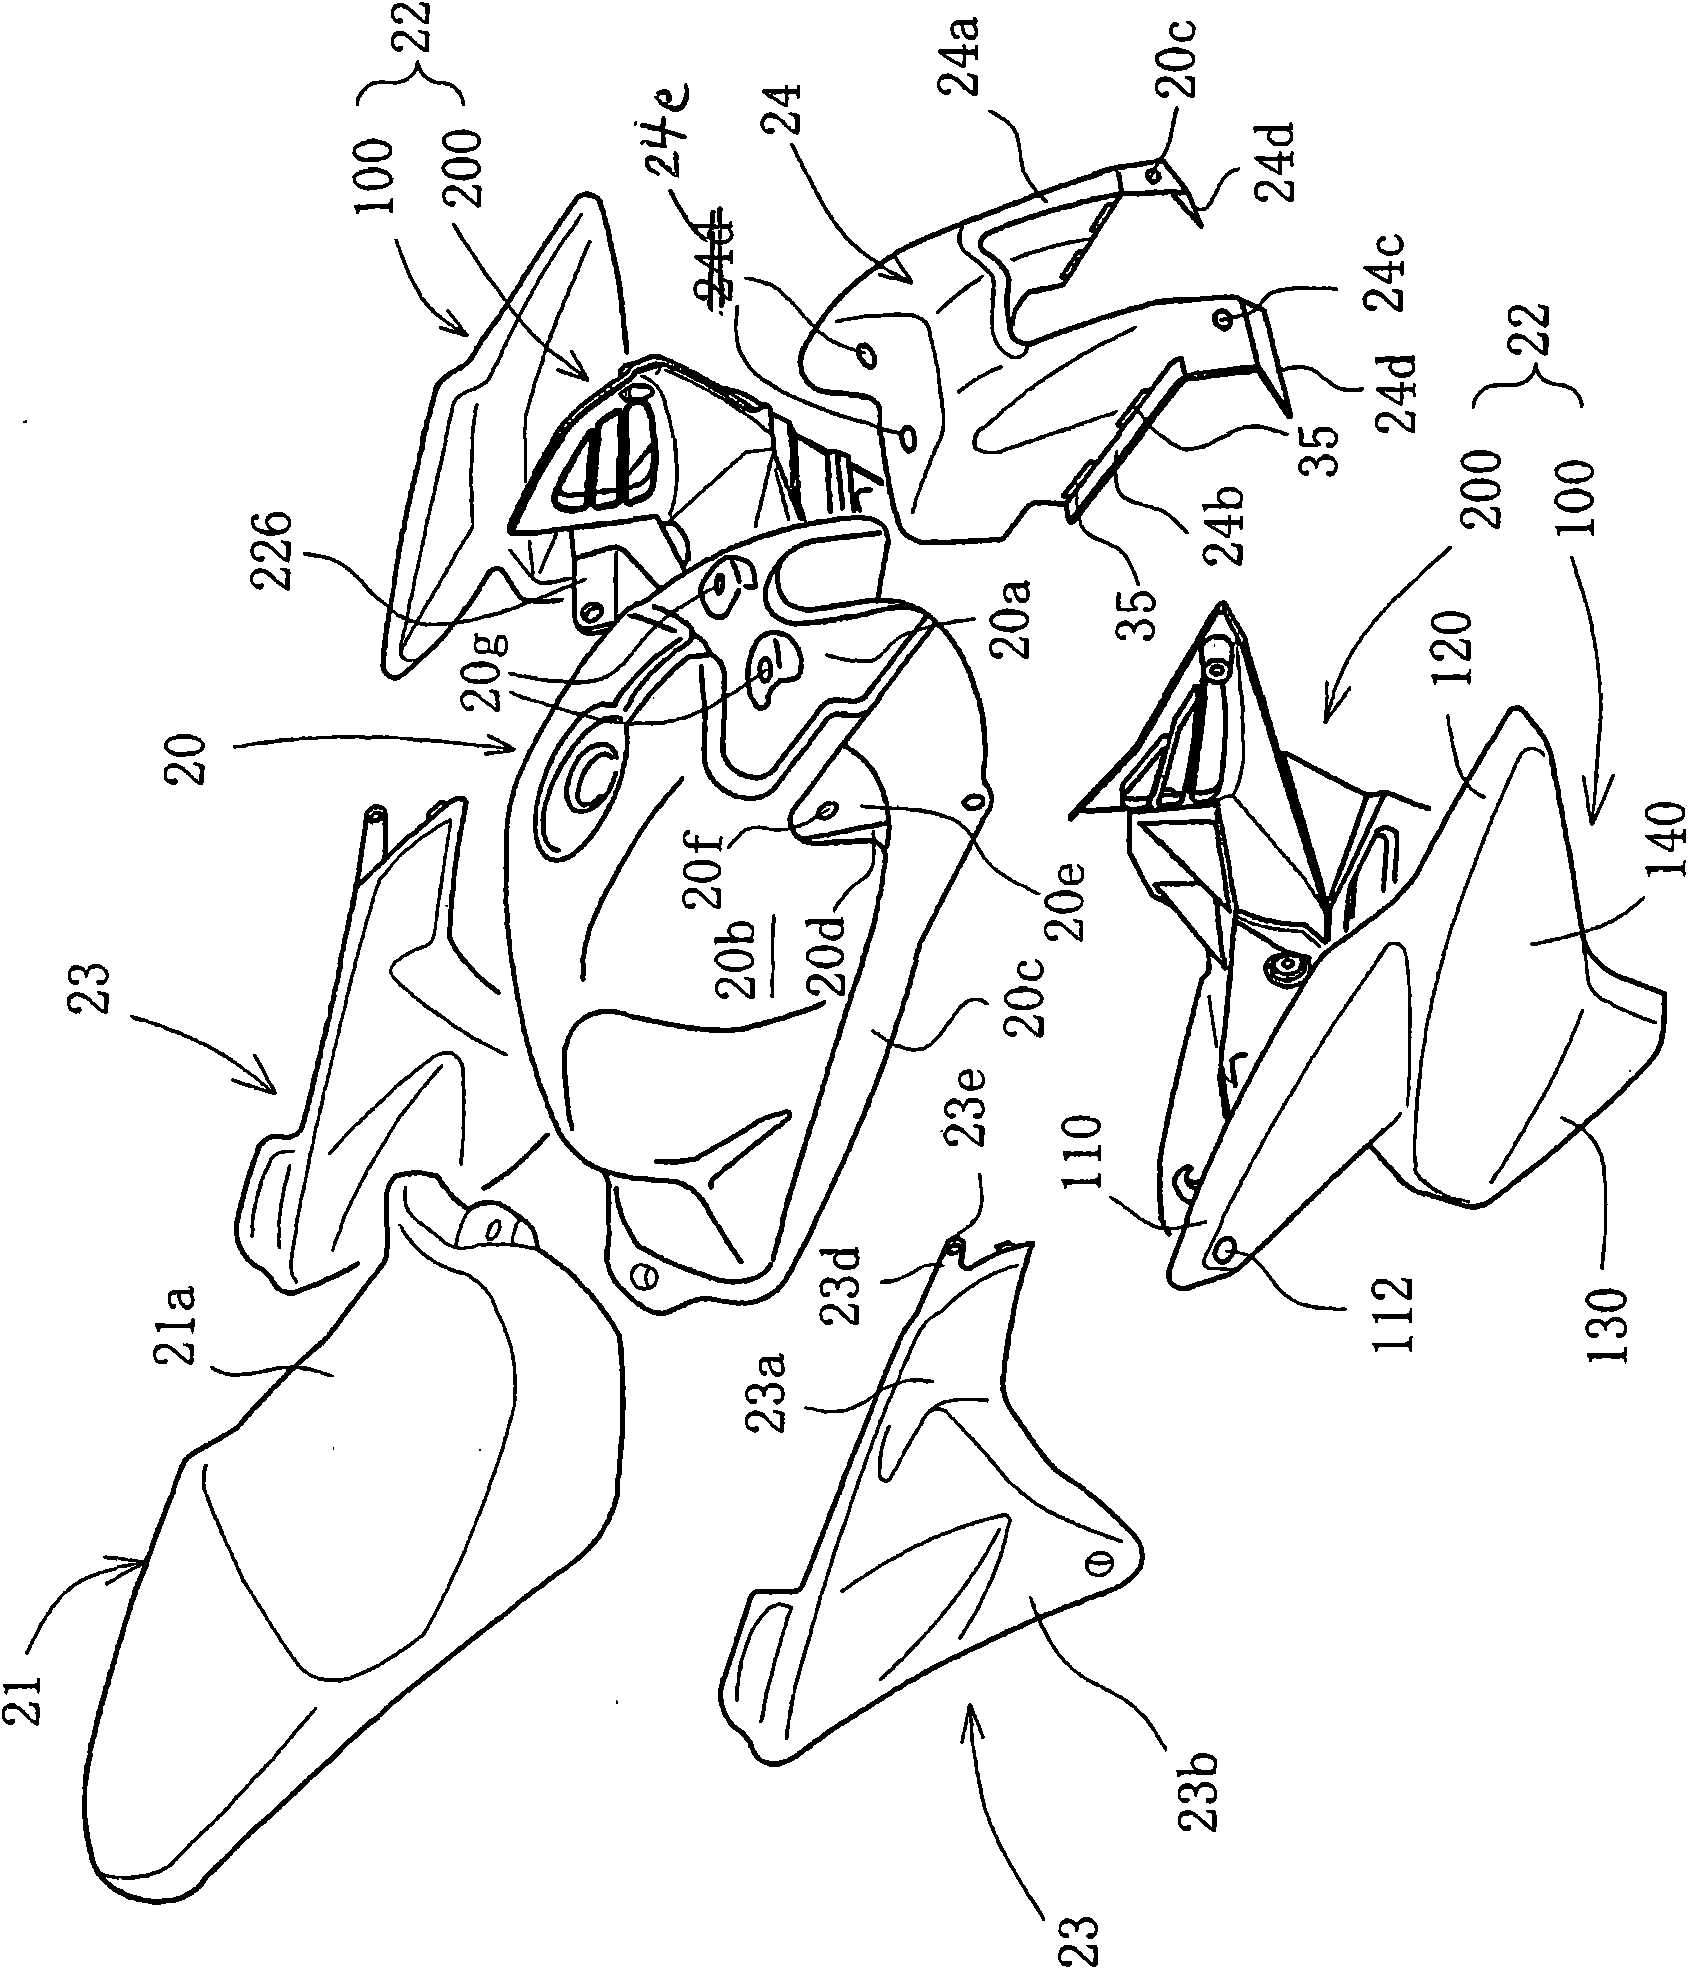 Air guide structure of motorcycle